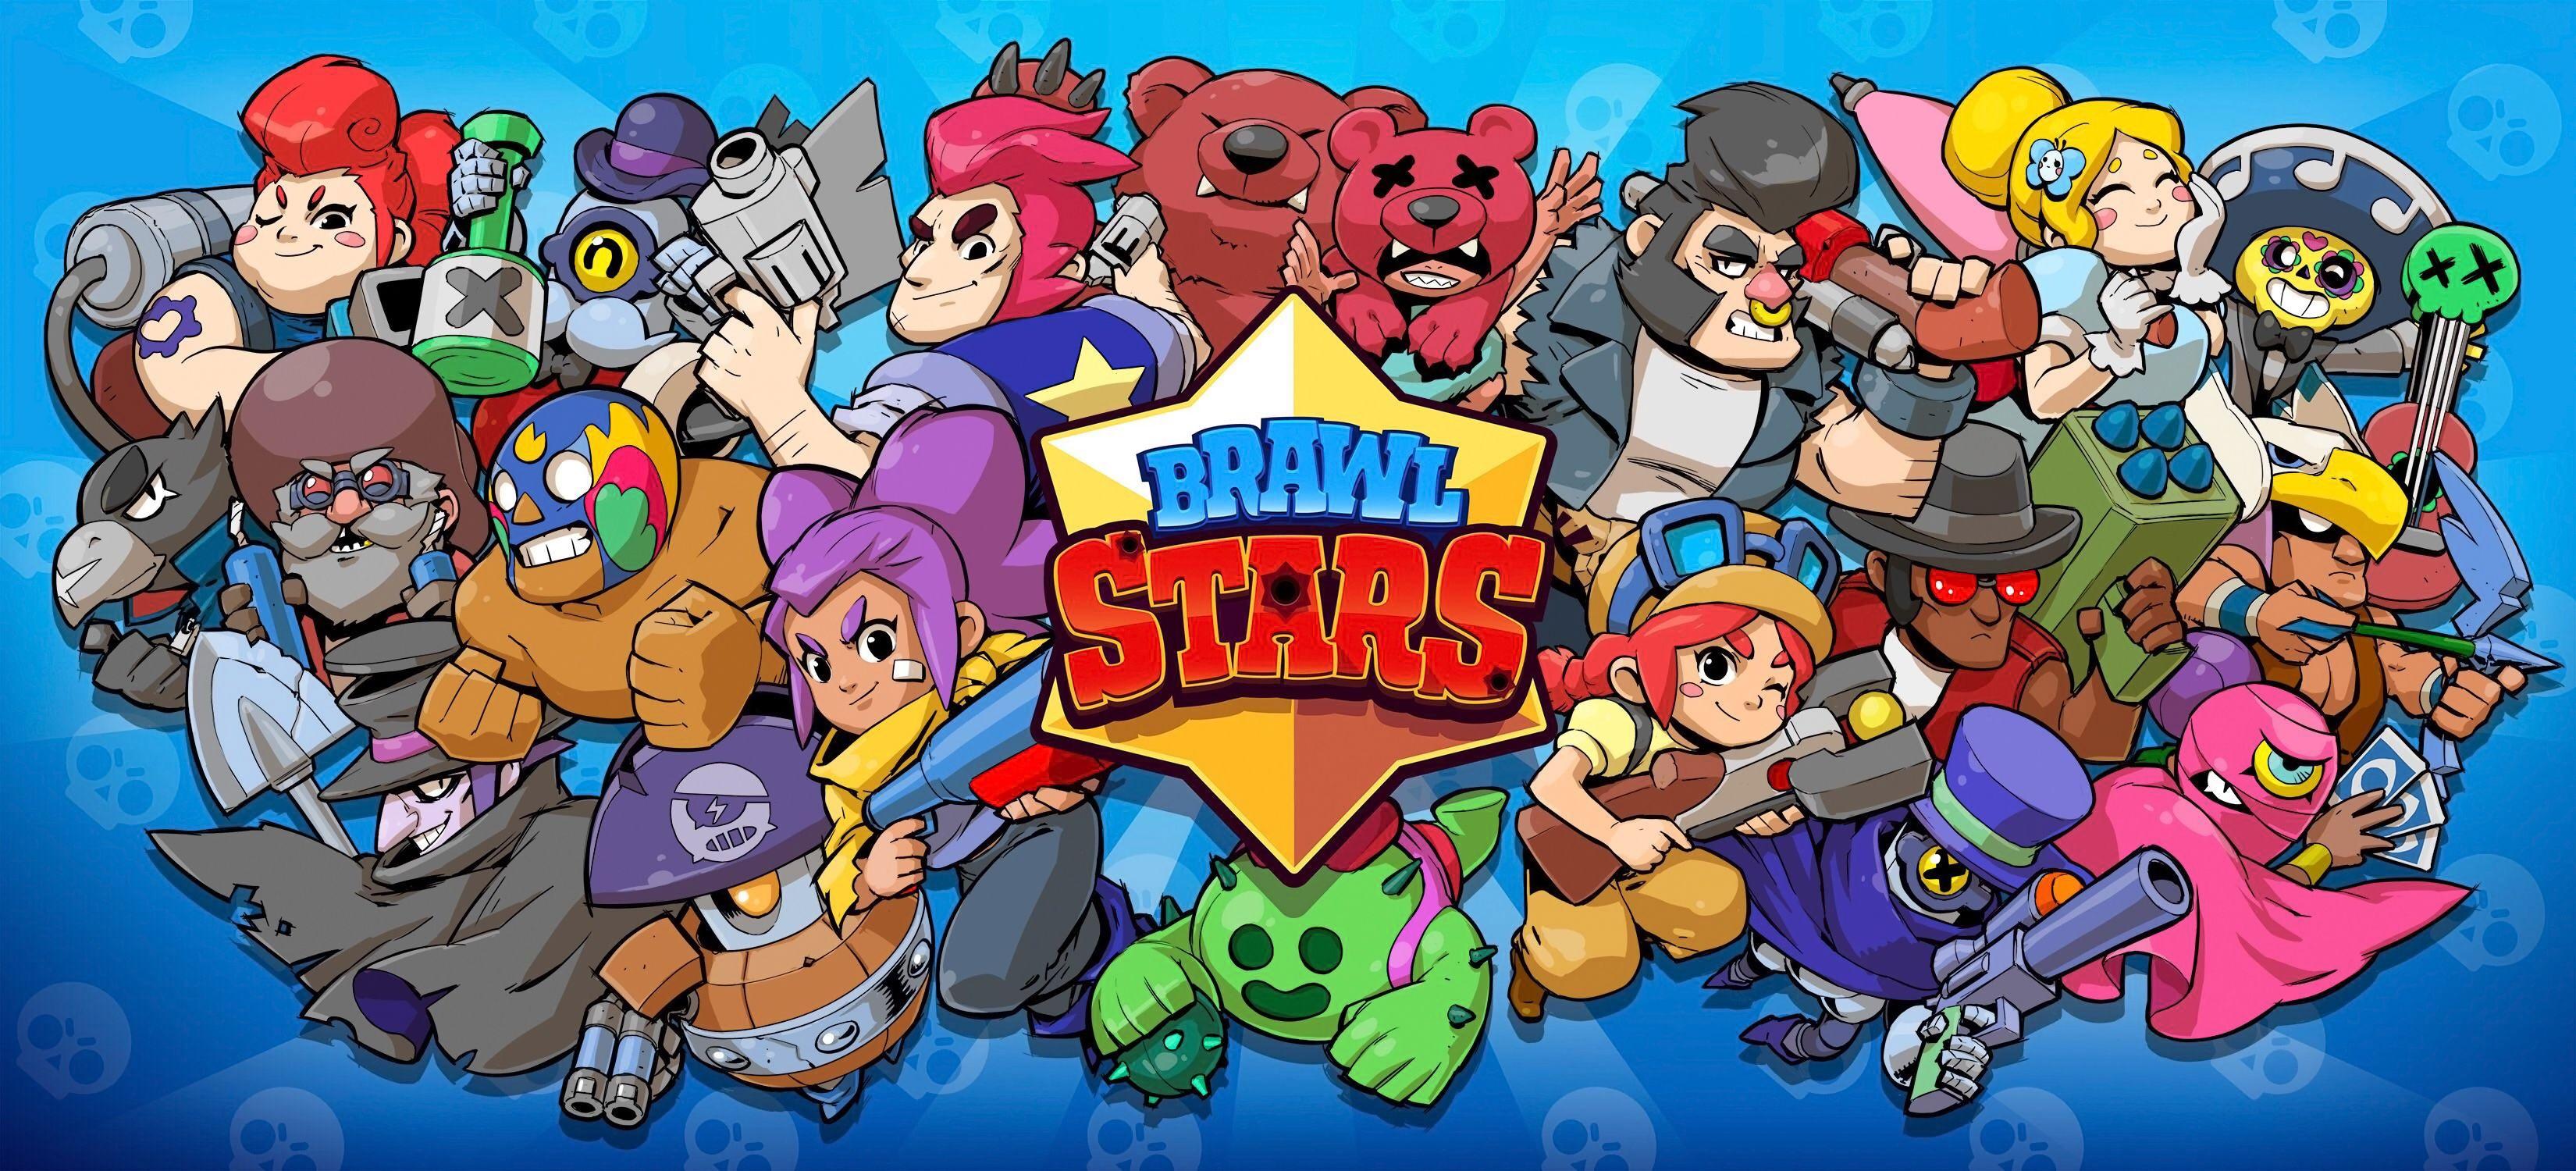 Brawl Wallpapers Top Free Brawl Backgrounds Wallpaperaccess - brawl stars supercell 1366x768